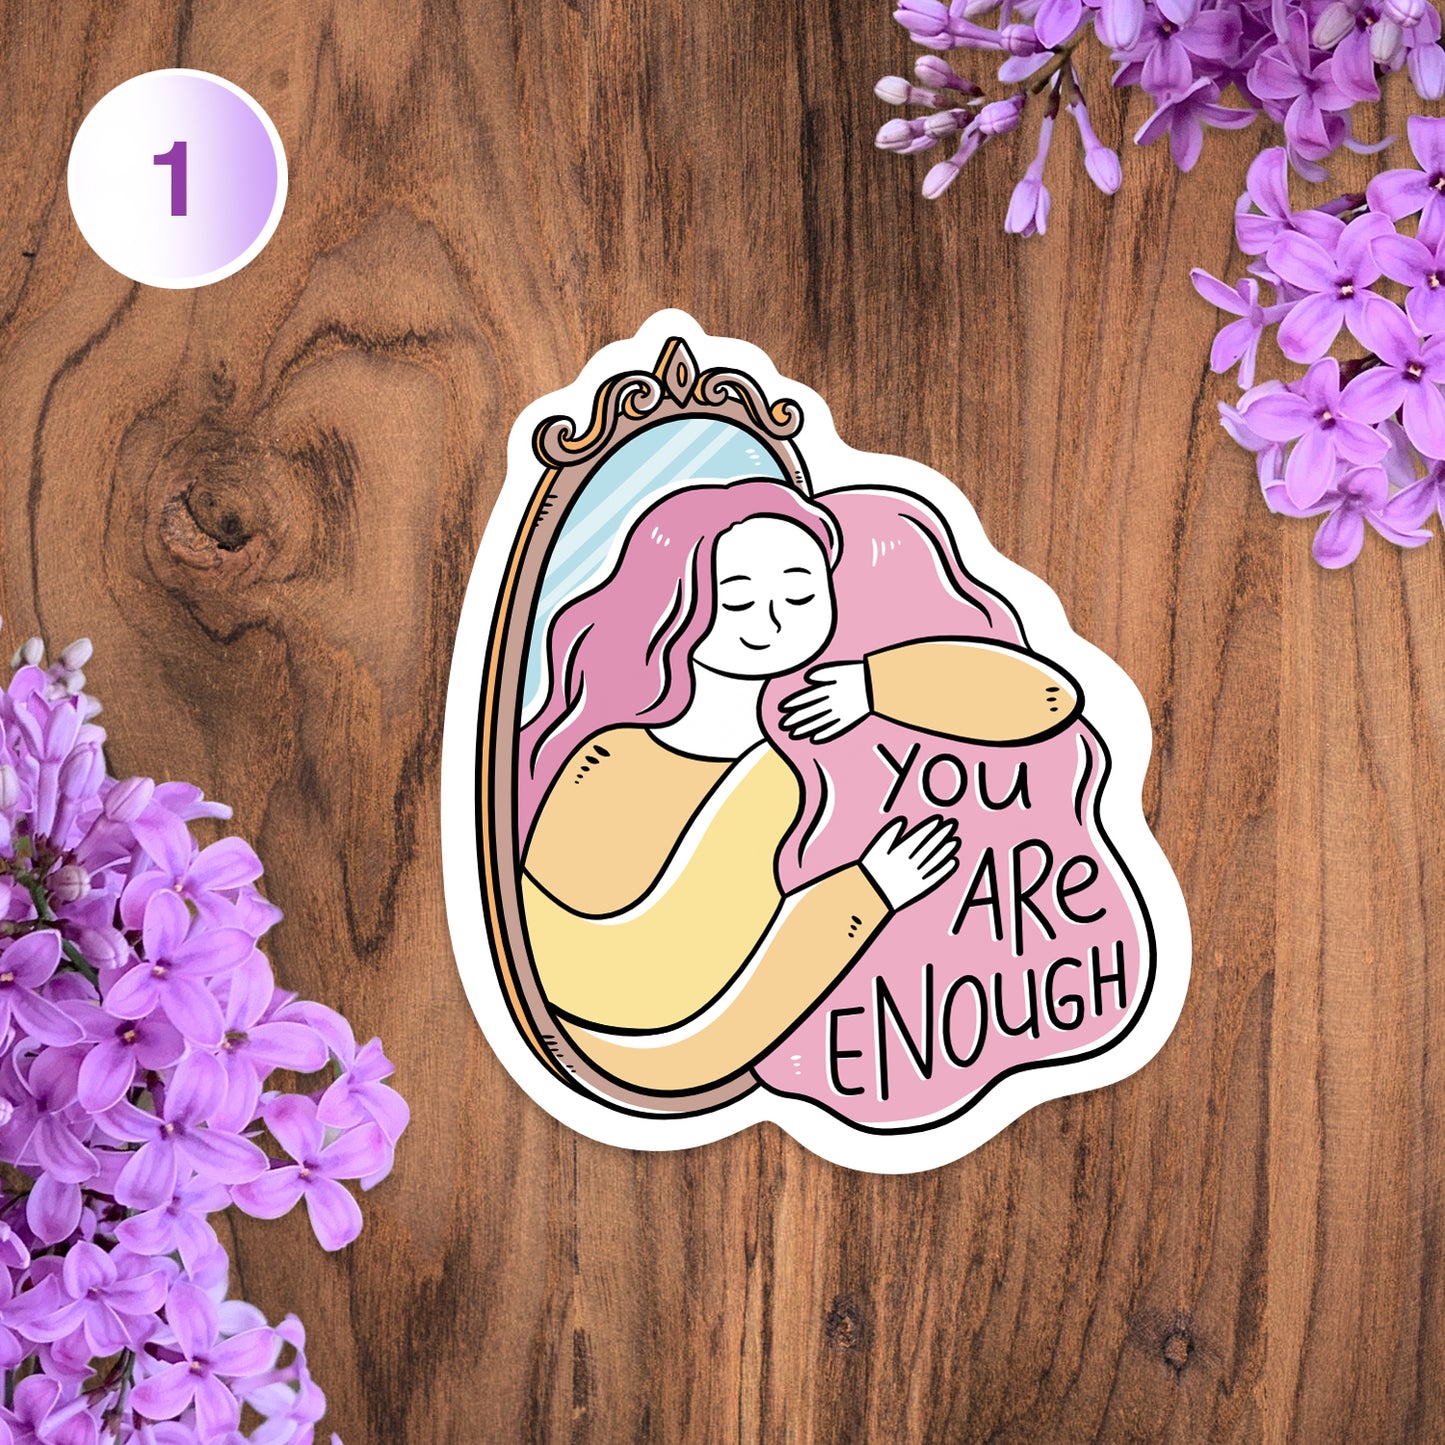 You Are Enough Message in The MirrorBody Positivity Sticker